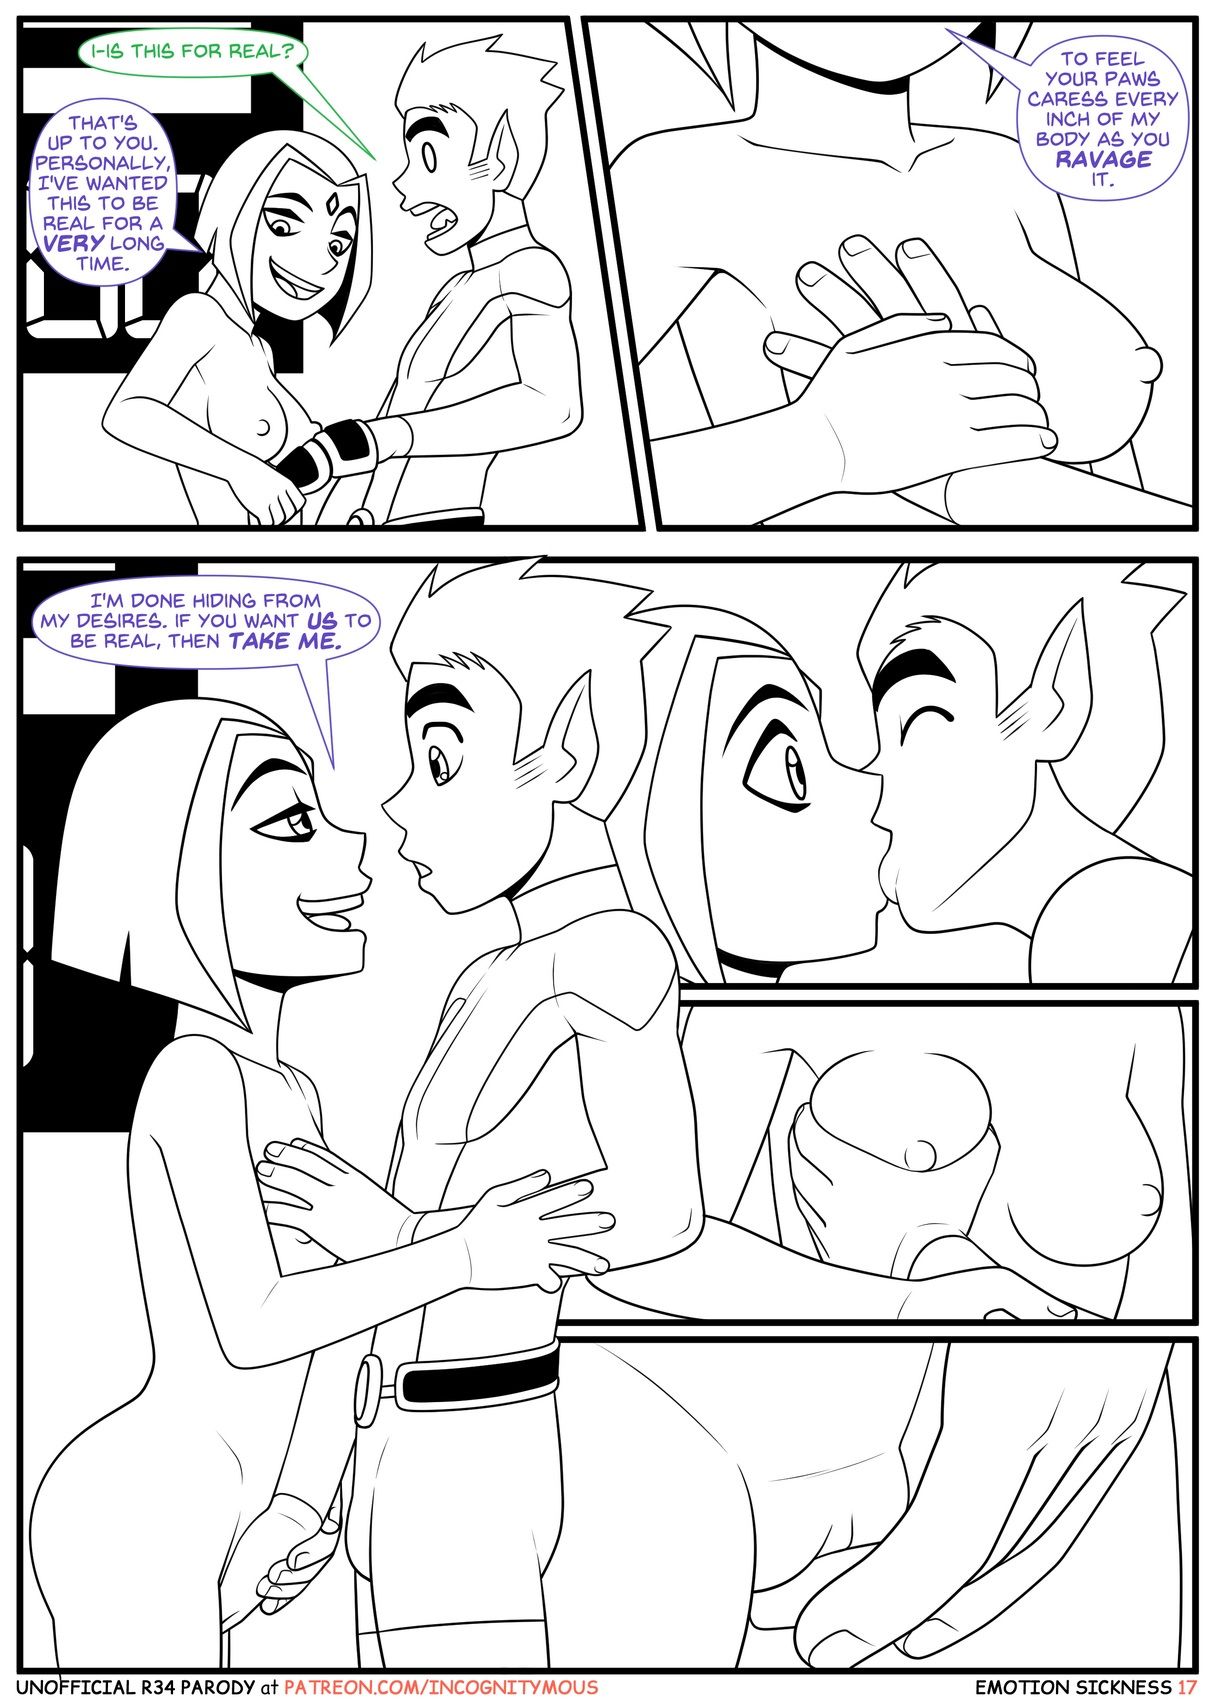 Teen Titans - Emotion Sickness (Incognitymous) page 34